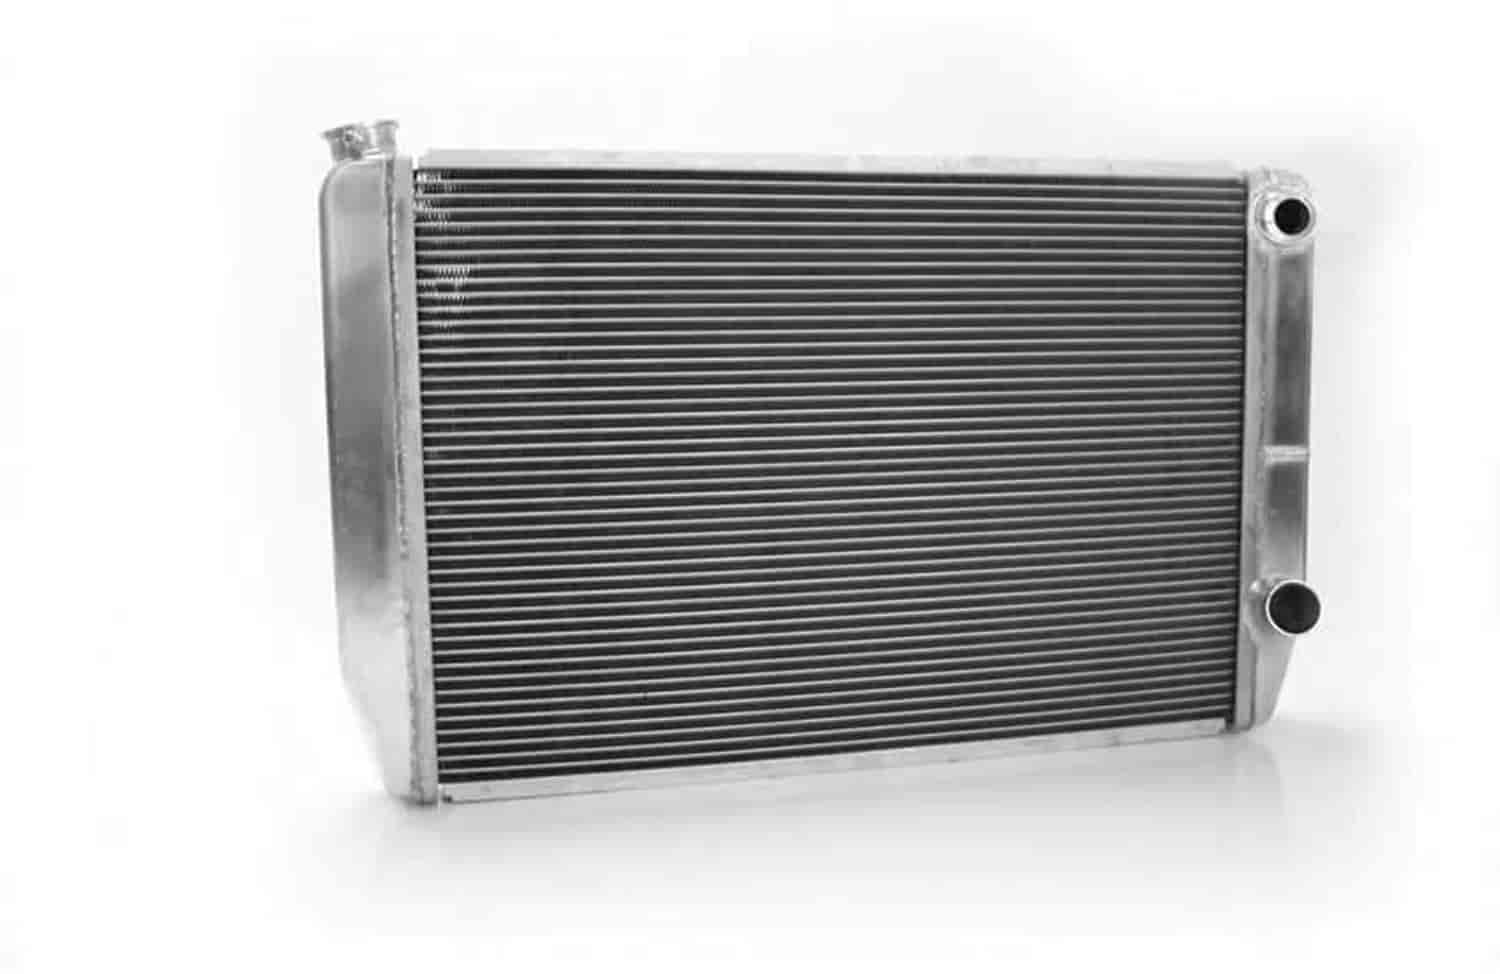 MegaCool Universal Fit Radiator Dual Pass Crossflow Design 31" x 19" with 16AN Inlet